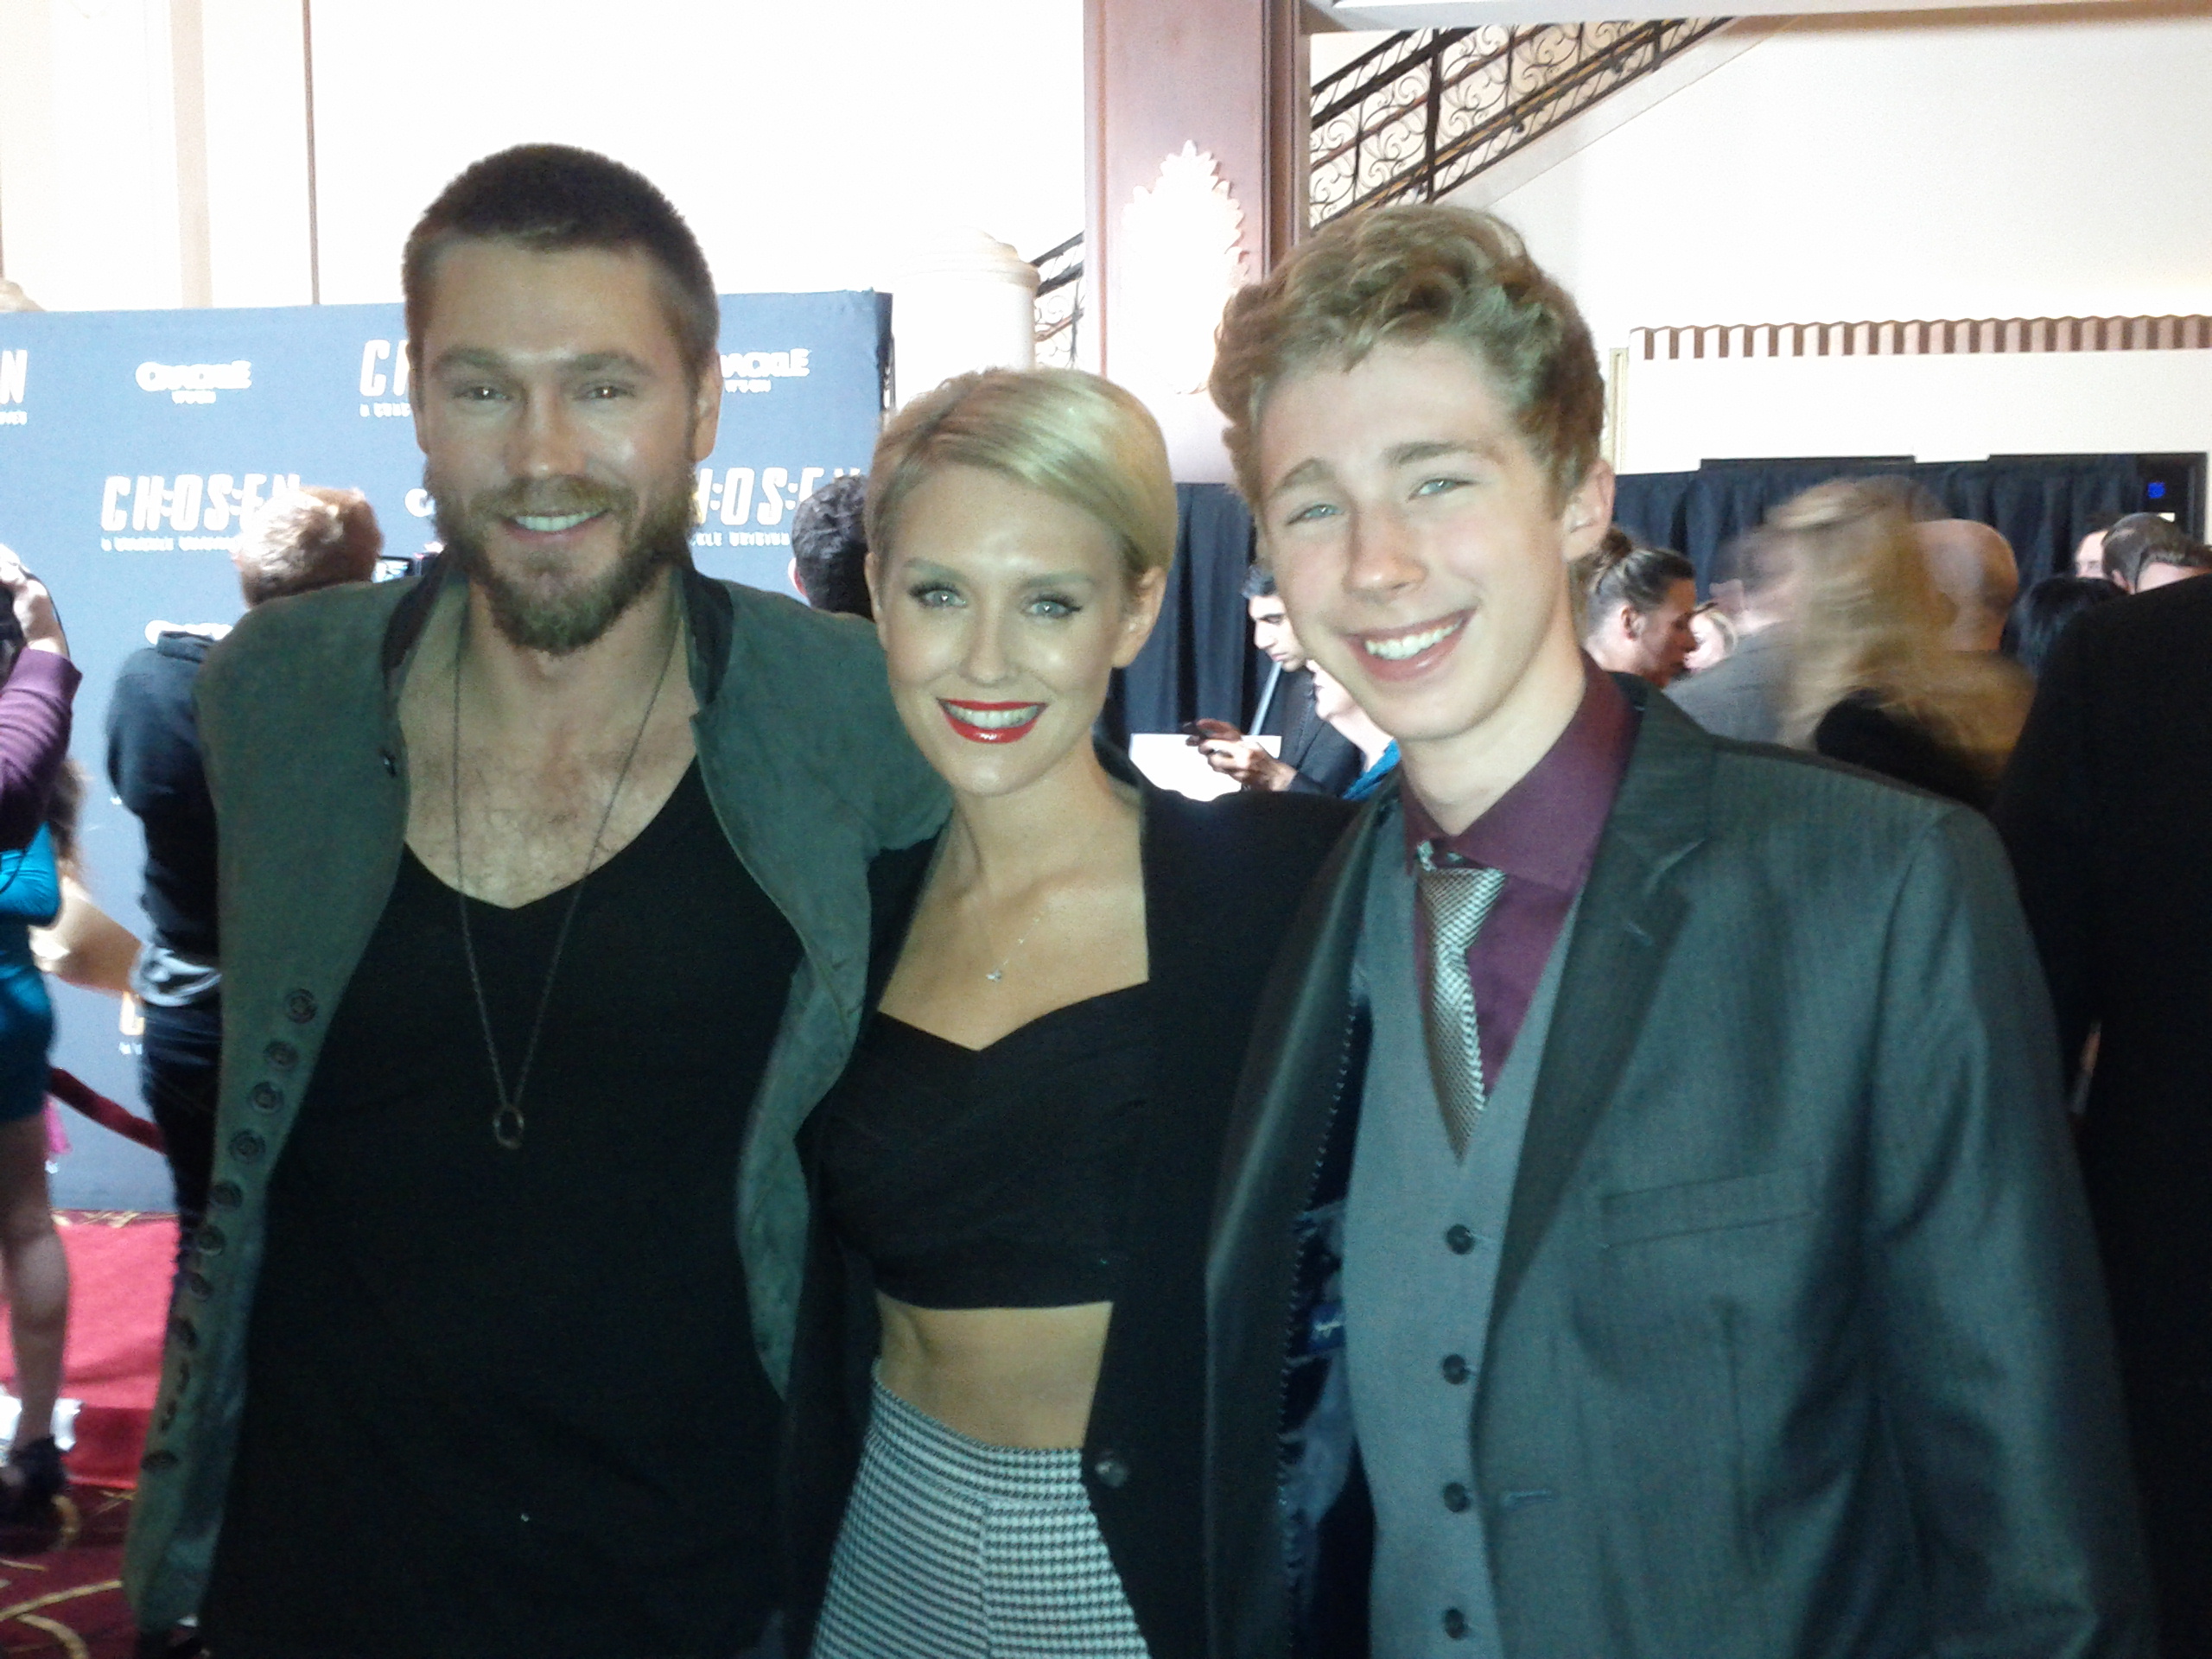 Joey Luthman, Chad Michael Murray and Nicky Whelan at the CH:OS:EN Season 2 Premier, Dec.3,2013 at The Grove, LA, CA.